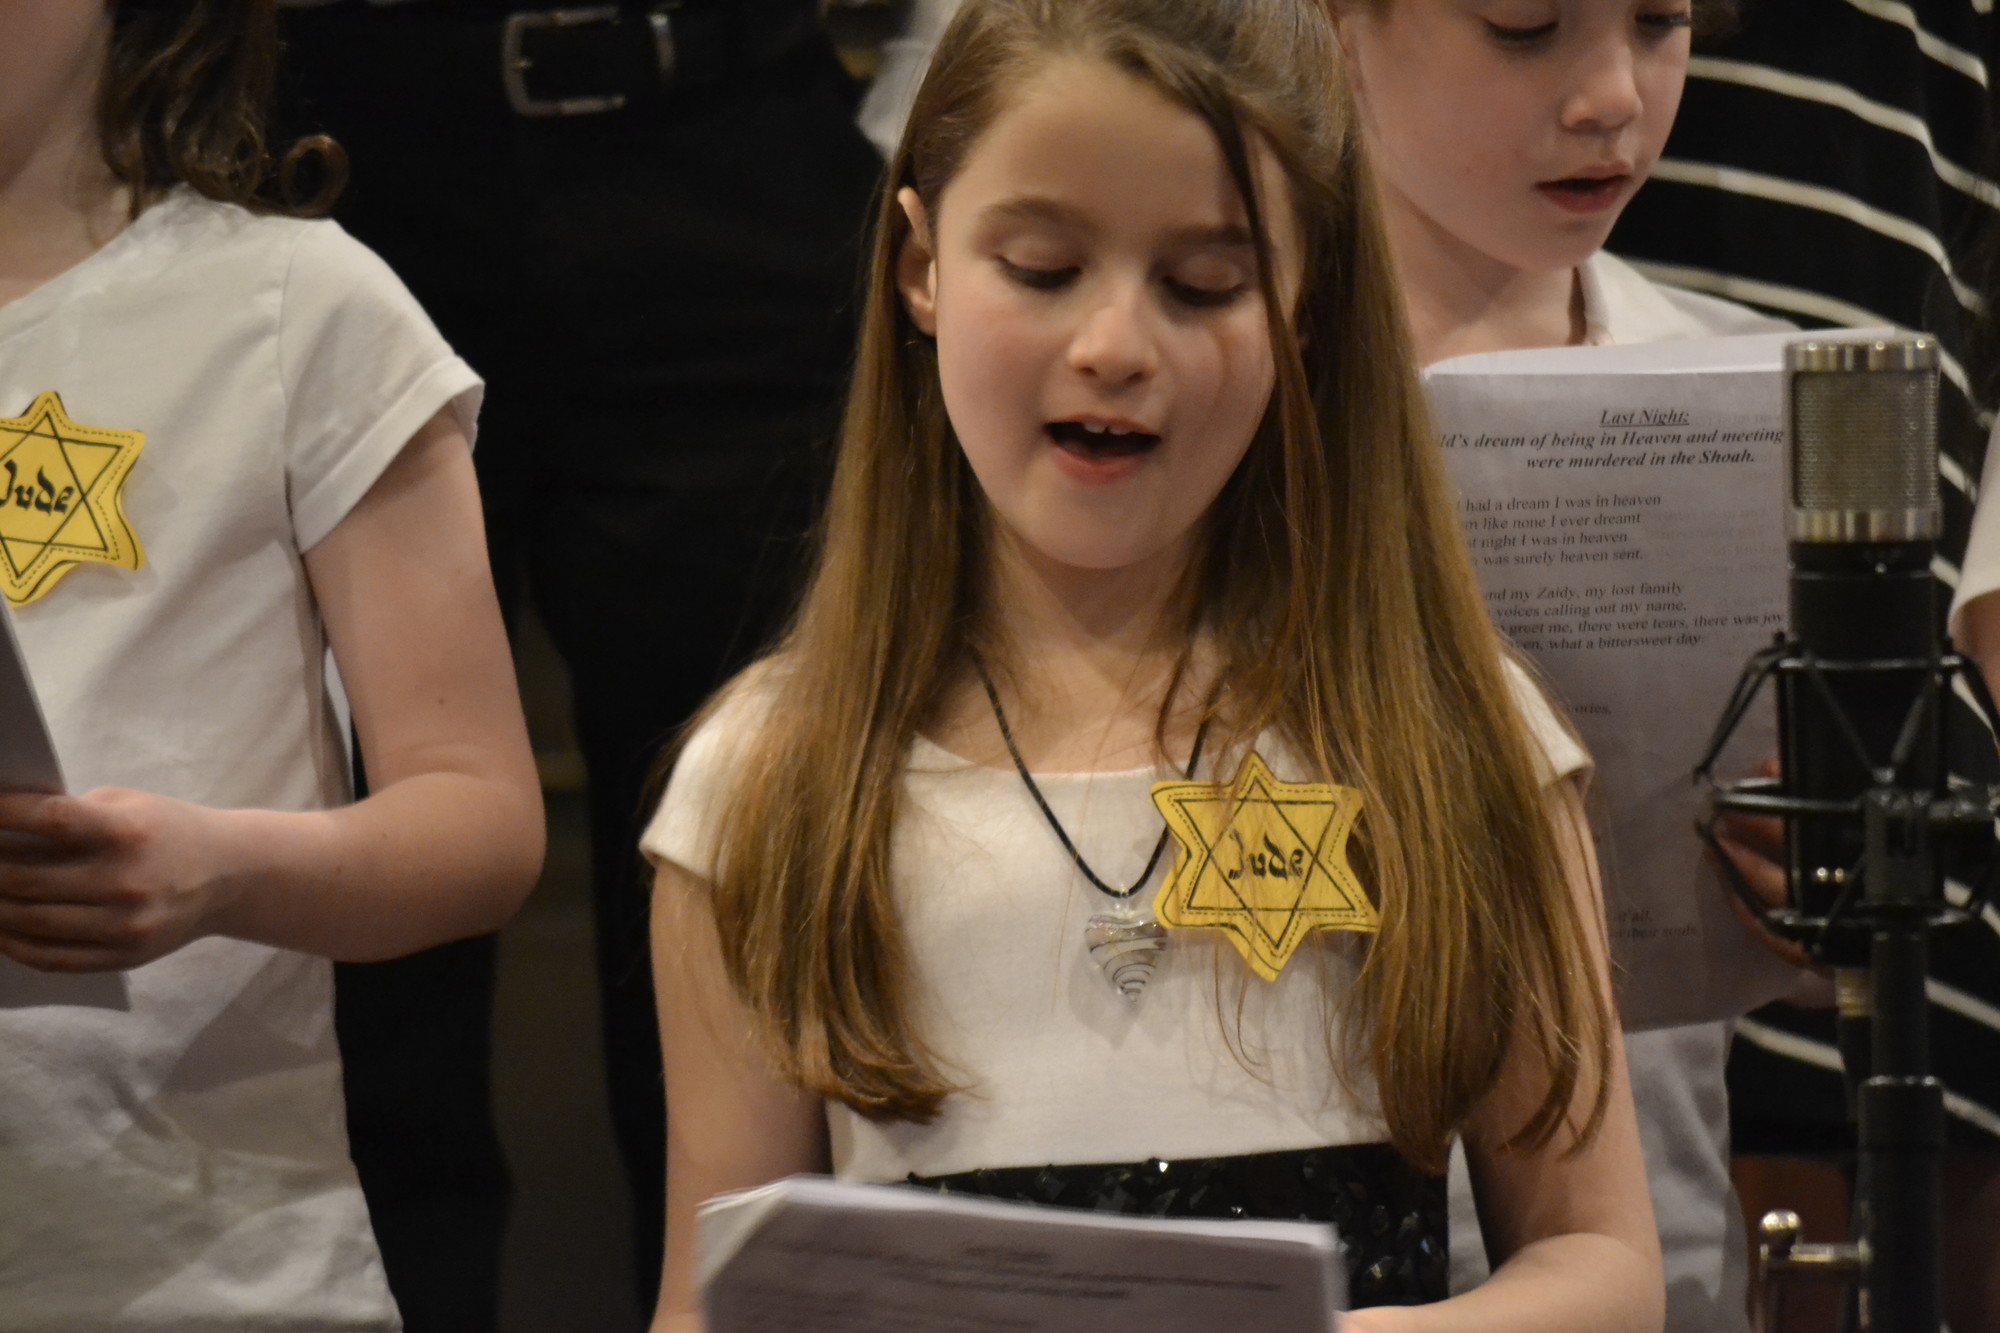 Student participation was an essential part of local services. Above, Rebecca Silverman, of EMJC’s Hebrew School chorus, sang to hundreds in attendance.